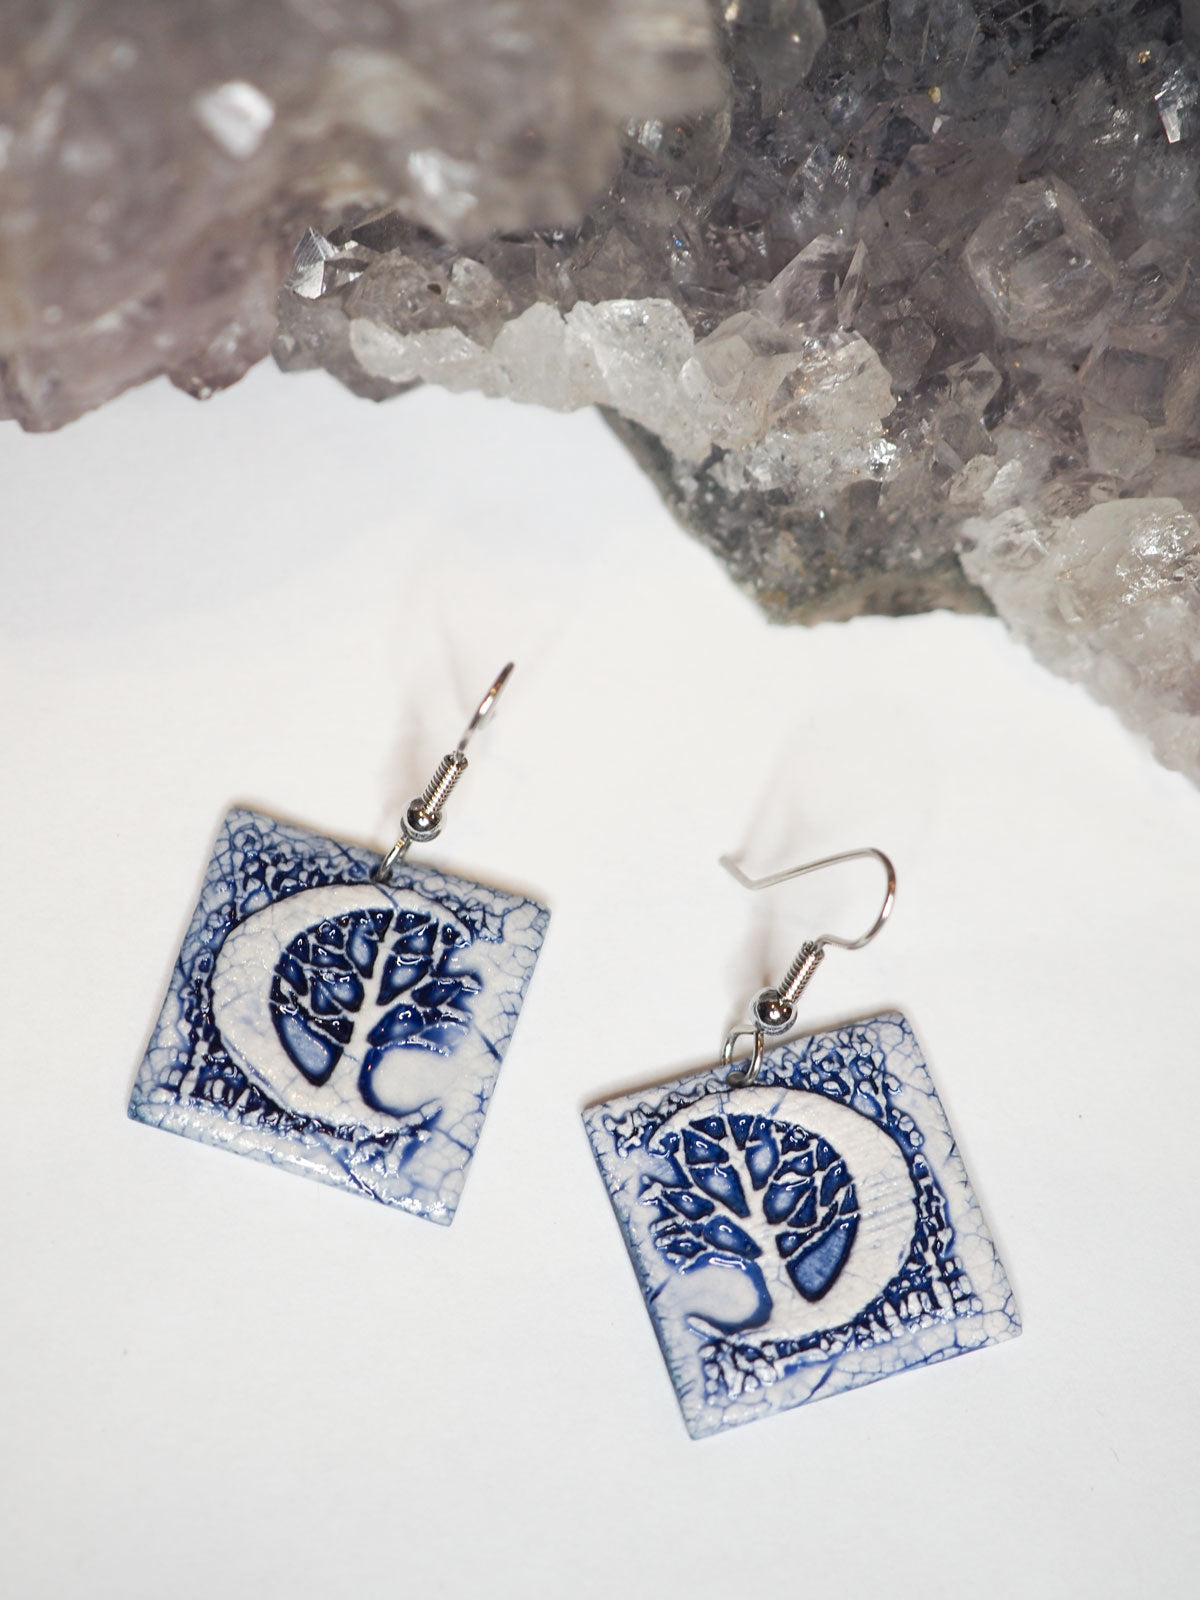 Hand-made, blue and white, square dangle earrings with a large crescent moon and forest scene